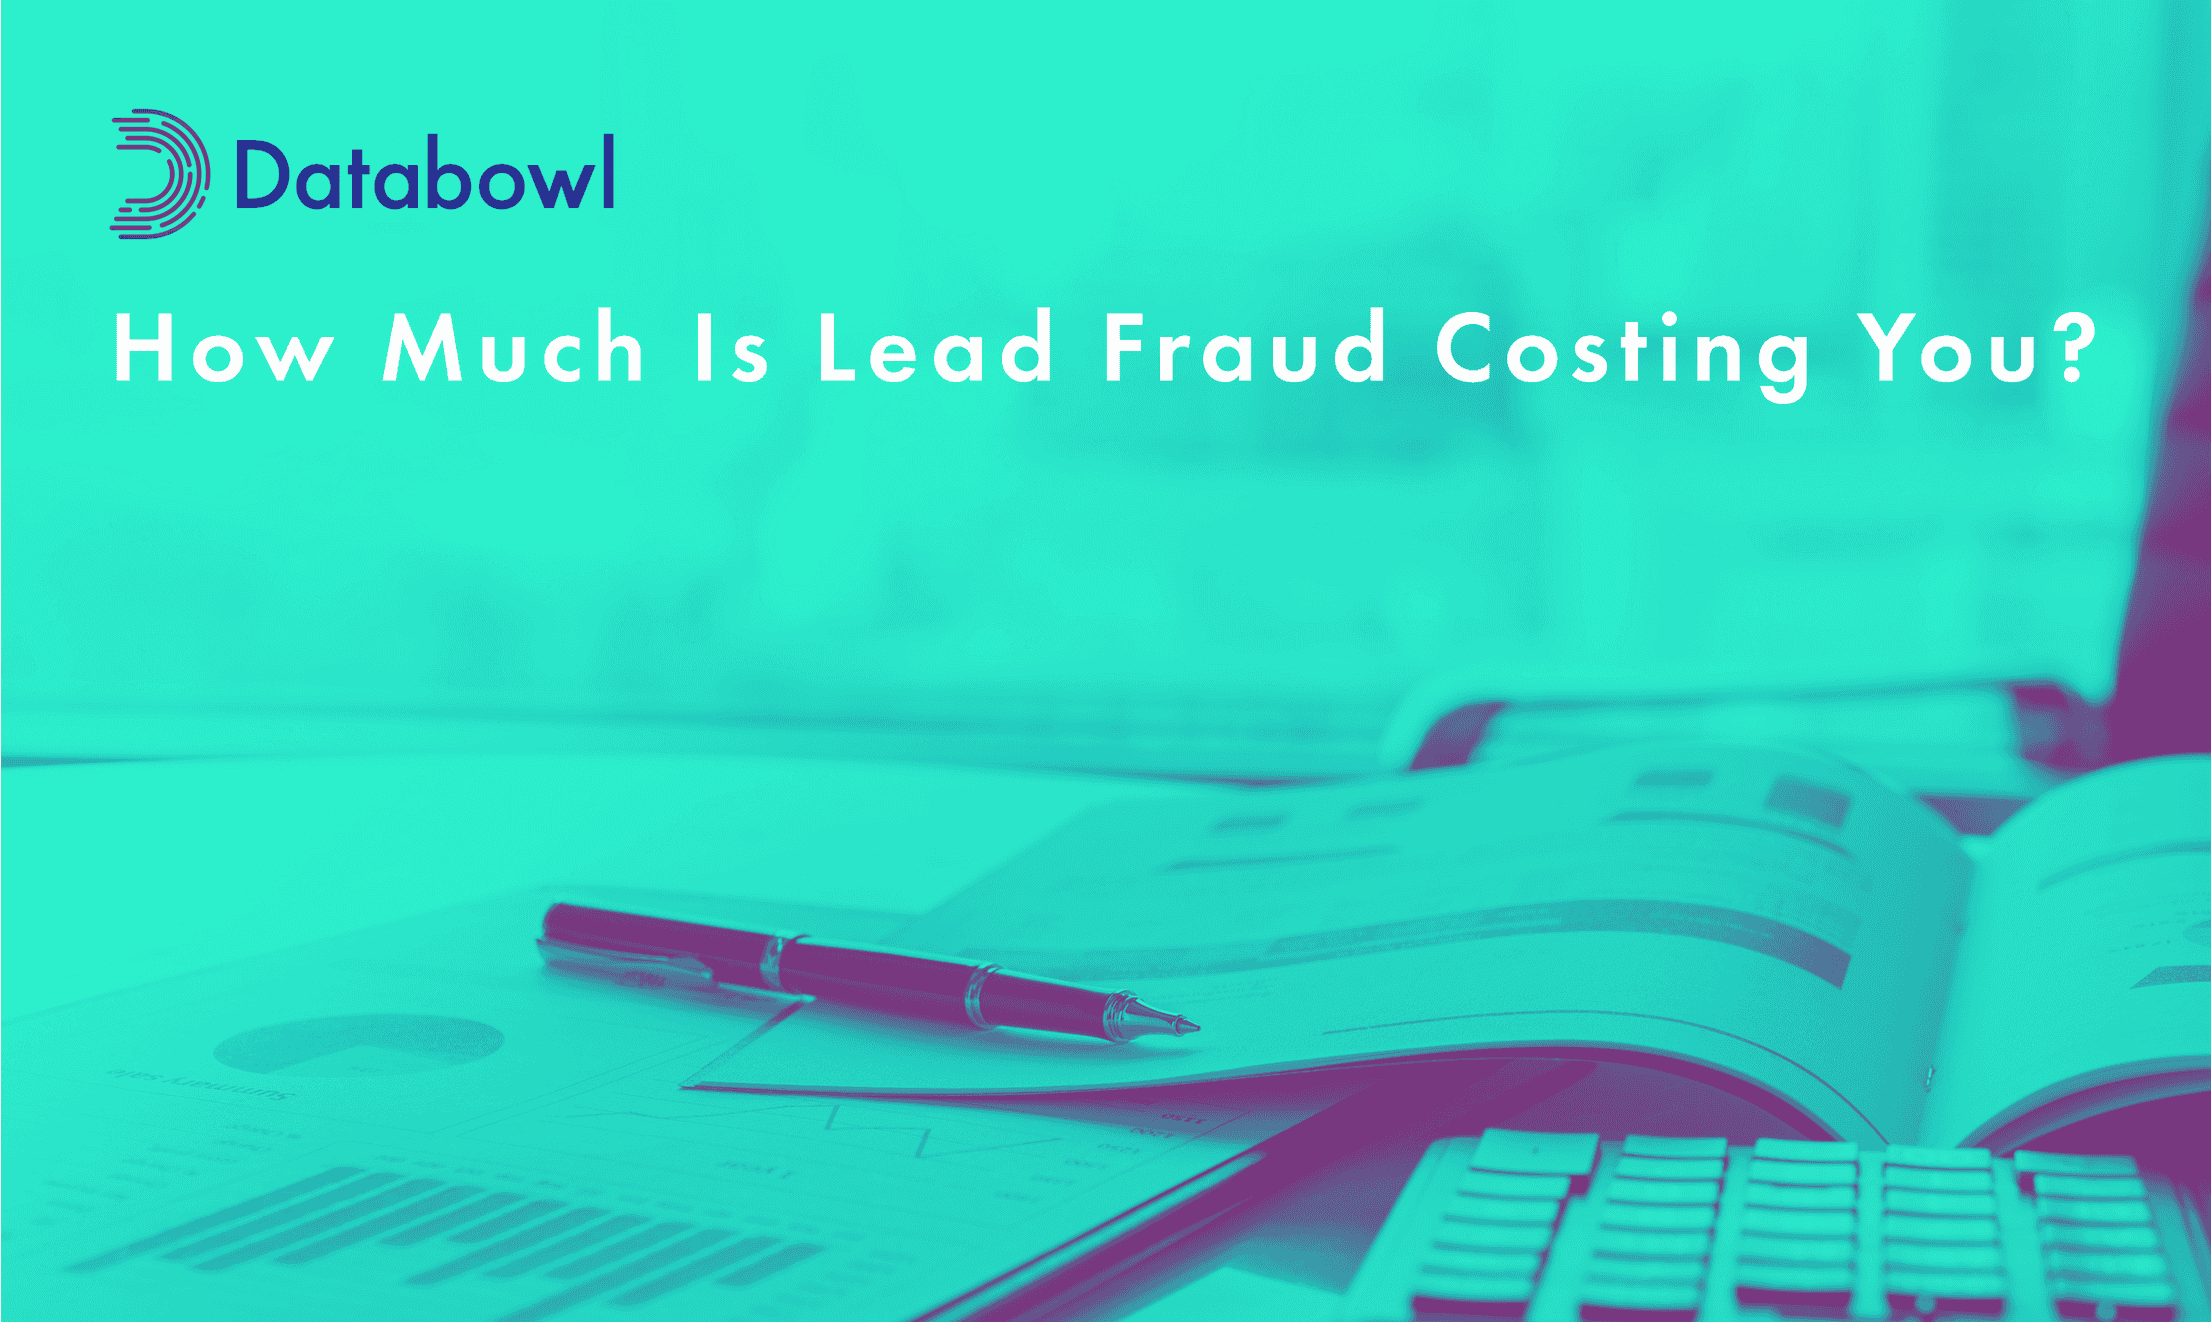 How Much Is Lead Fraud Costing You?